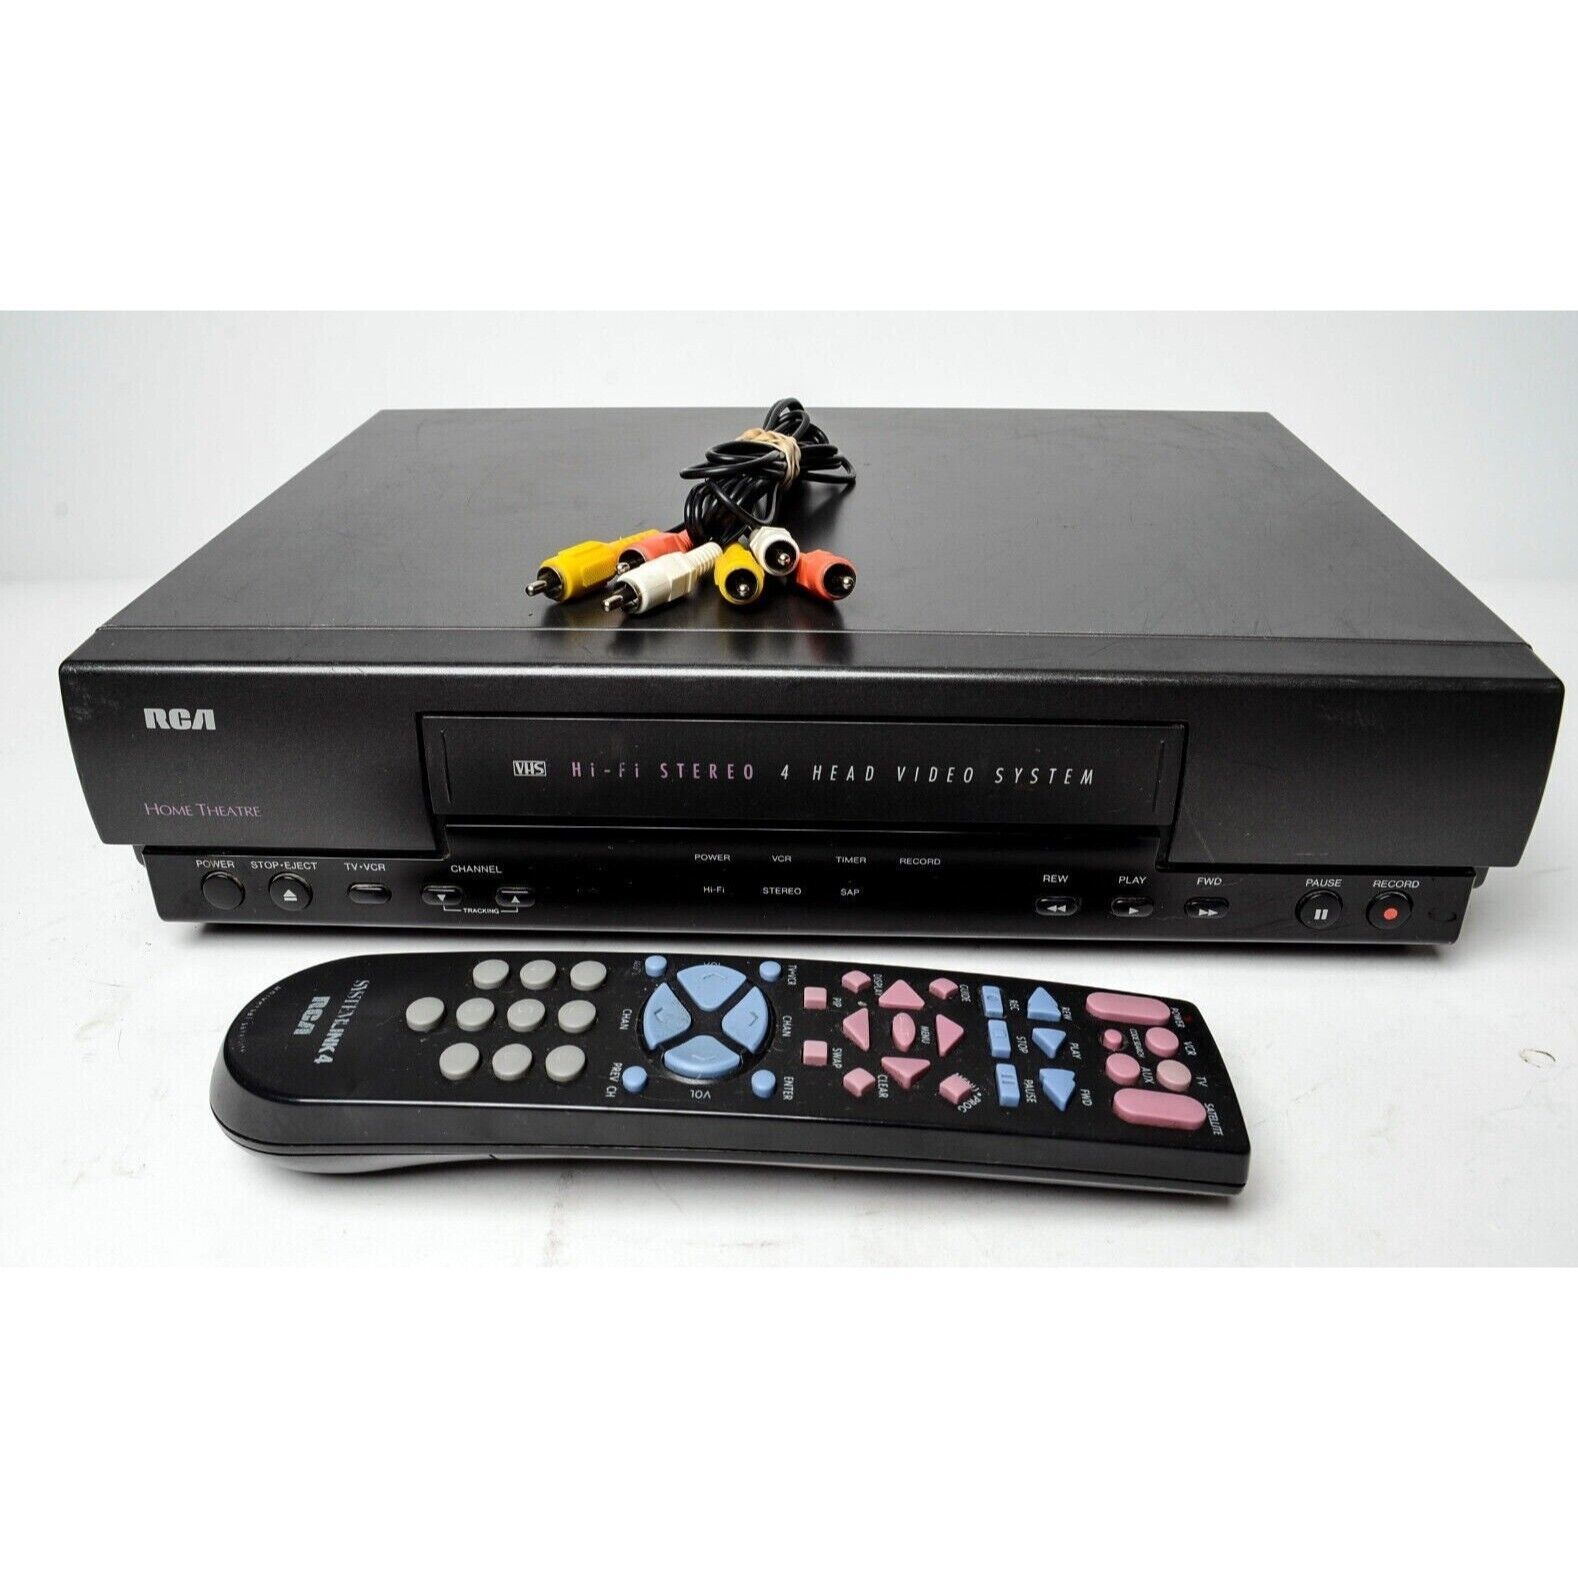 RCA VR603 Stereo 4 Head VHS VCR Vhs Player With Remote & Cables - $127.38